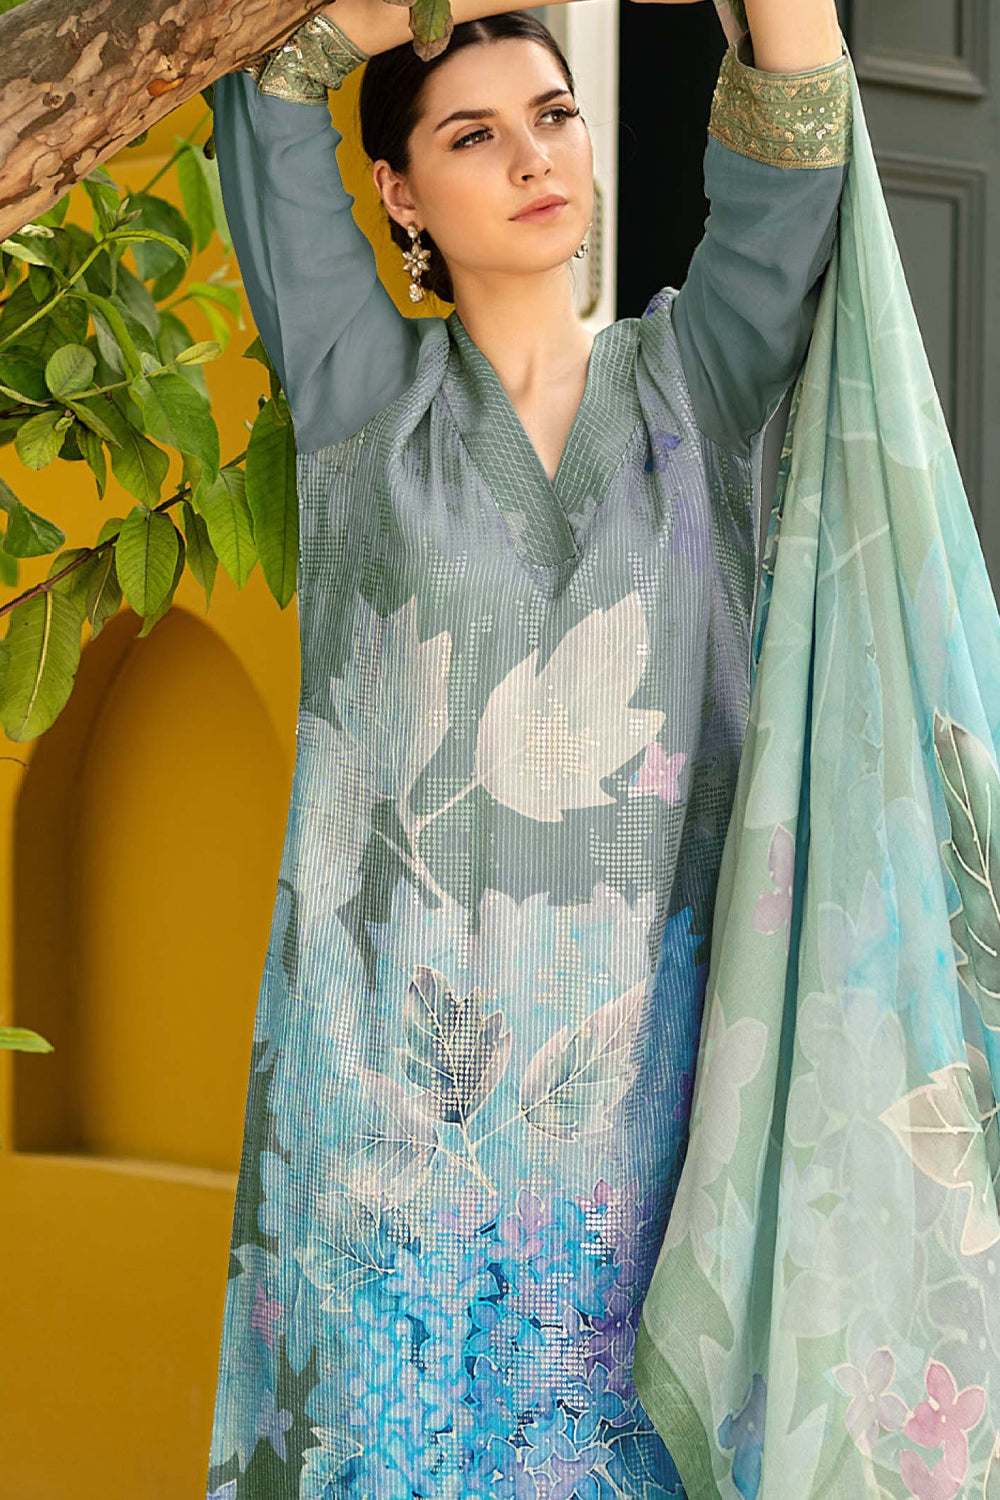 Sea Green & Blue Color Muslin Embroidered Unstitched Suit Material